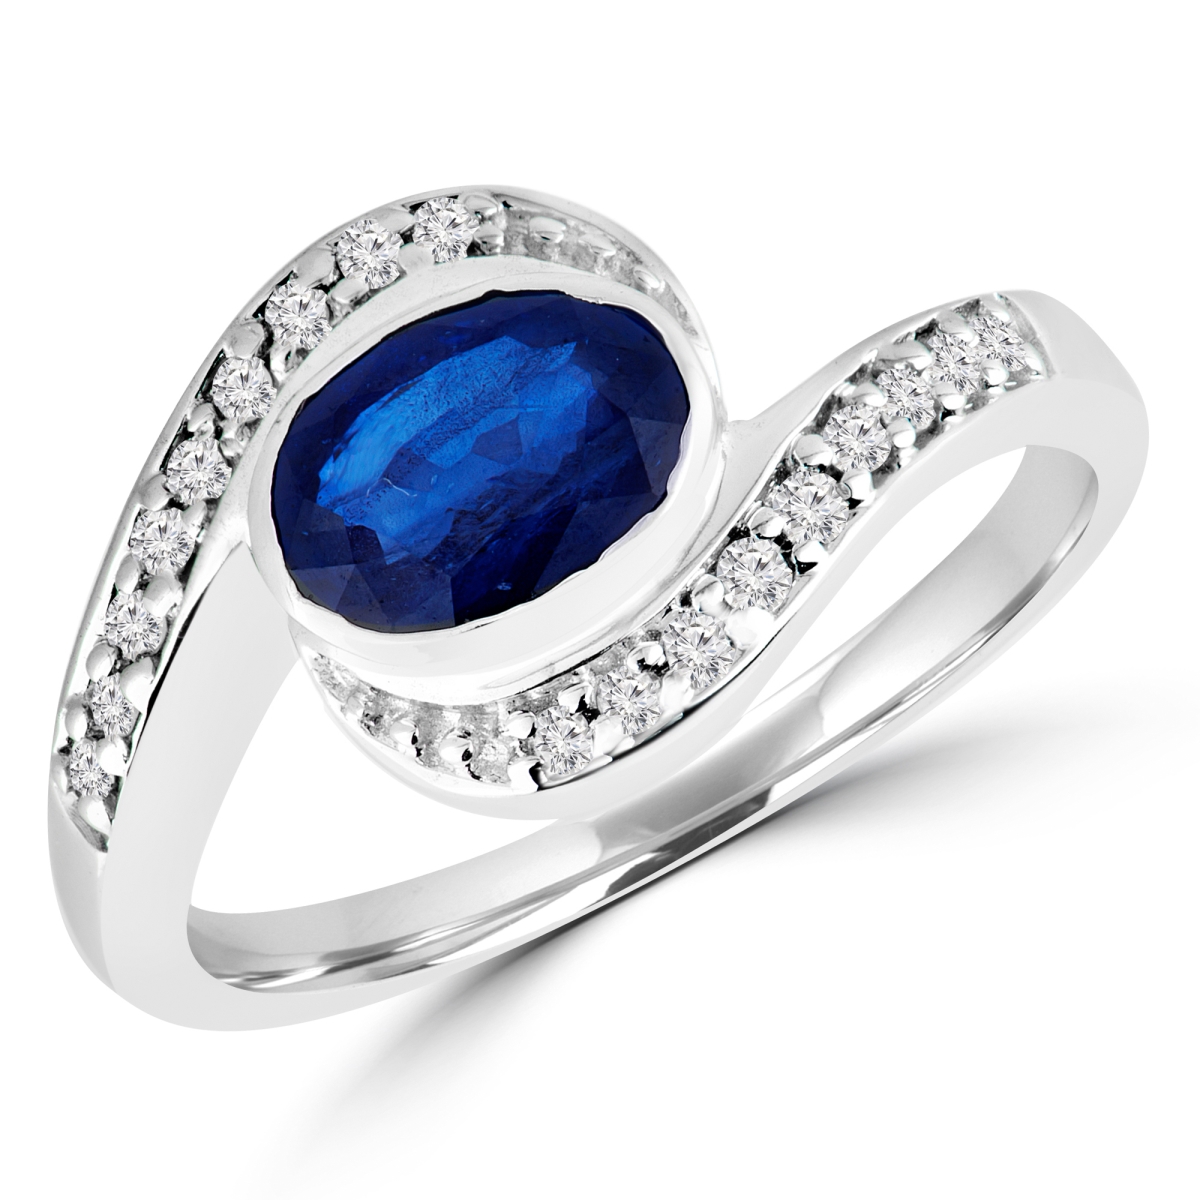 Picture of Majesty Diamonds MDR170020-8.75 1.1 CTW Oval Blue Sapphire Bypass Cocktail Ring in 14K White Gold - 8.75